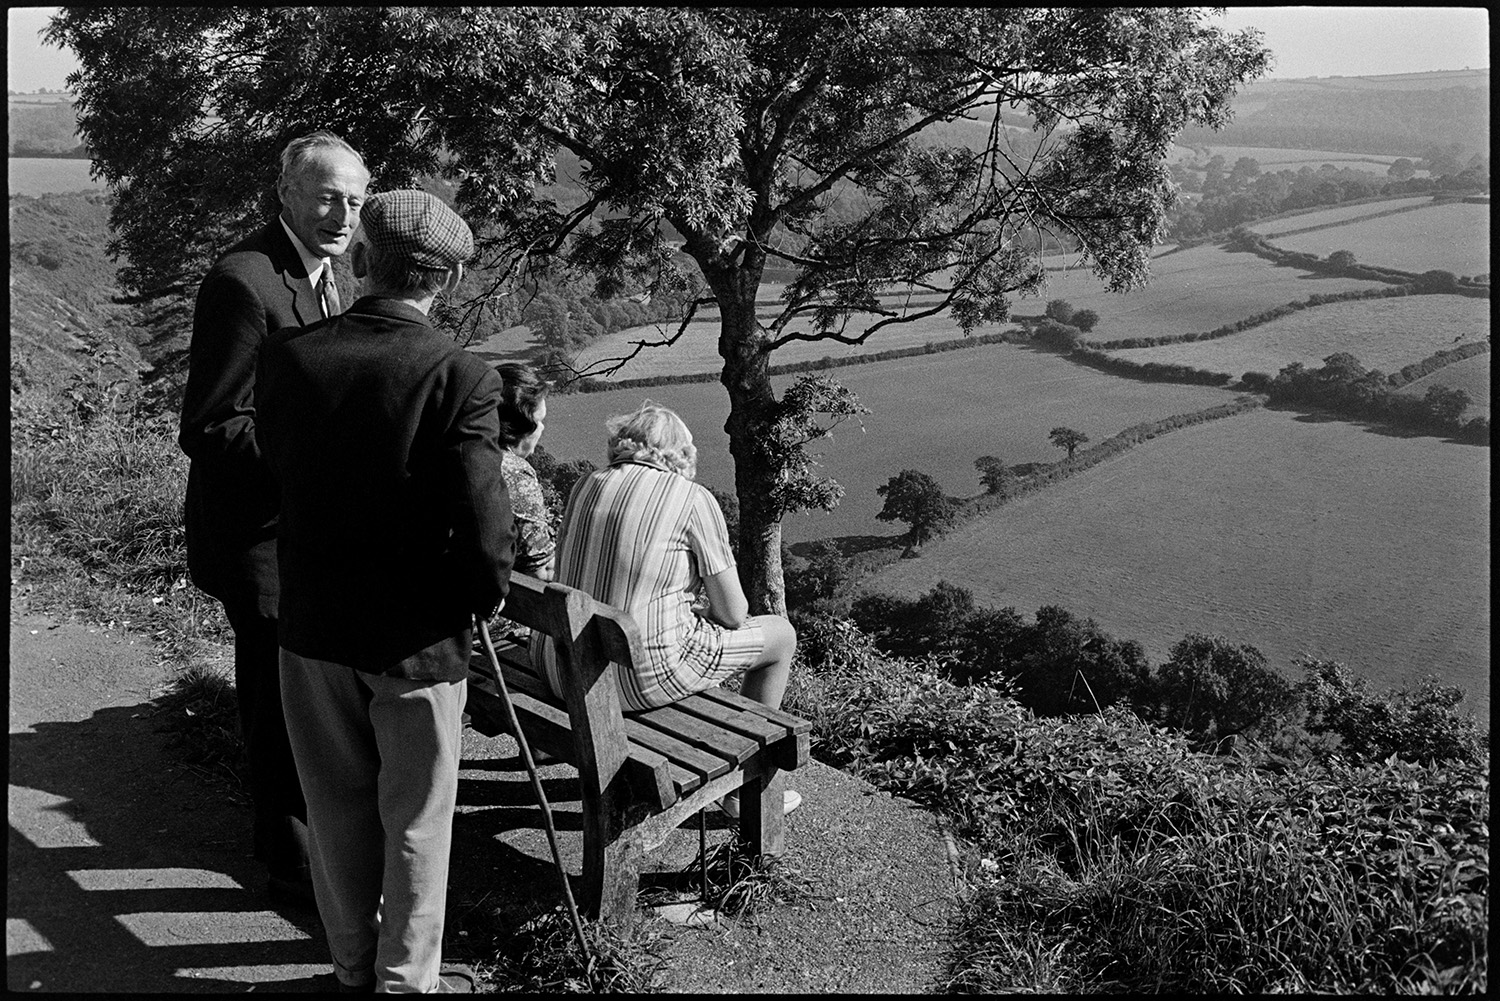 People and children enjoying park and fine view, bicycles. 
[Two women sat on a bench in a park at Torrington looking at a view of the valley below with fields, trees and hedges, Two men are stood behind the bench.]